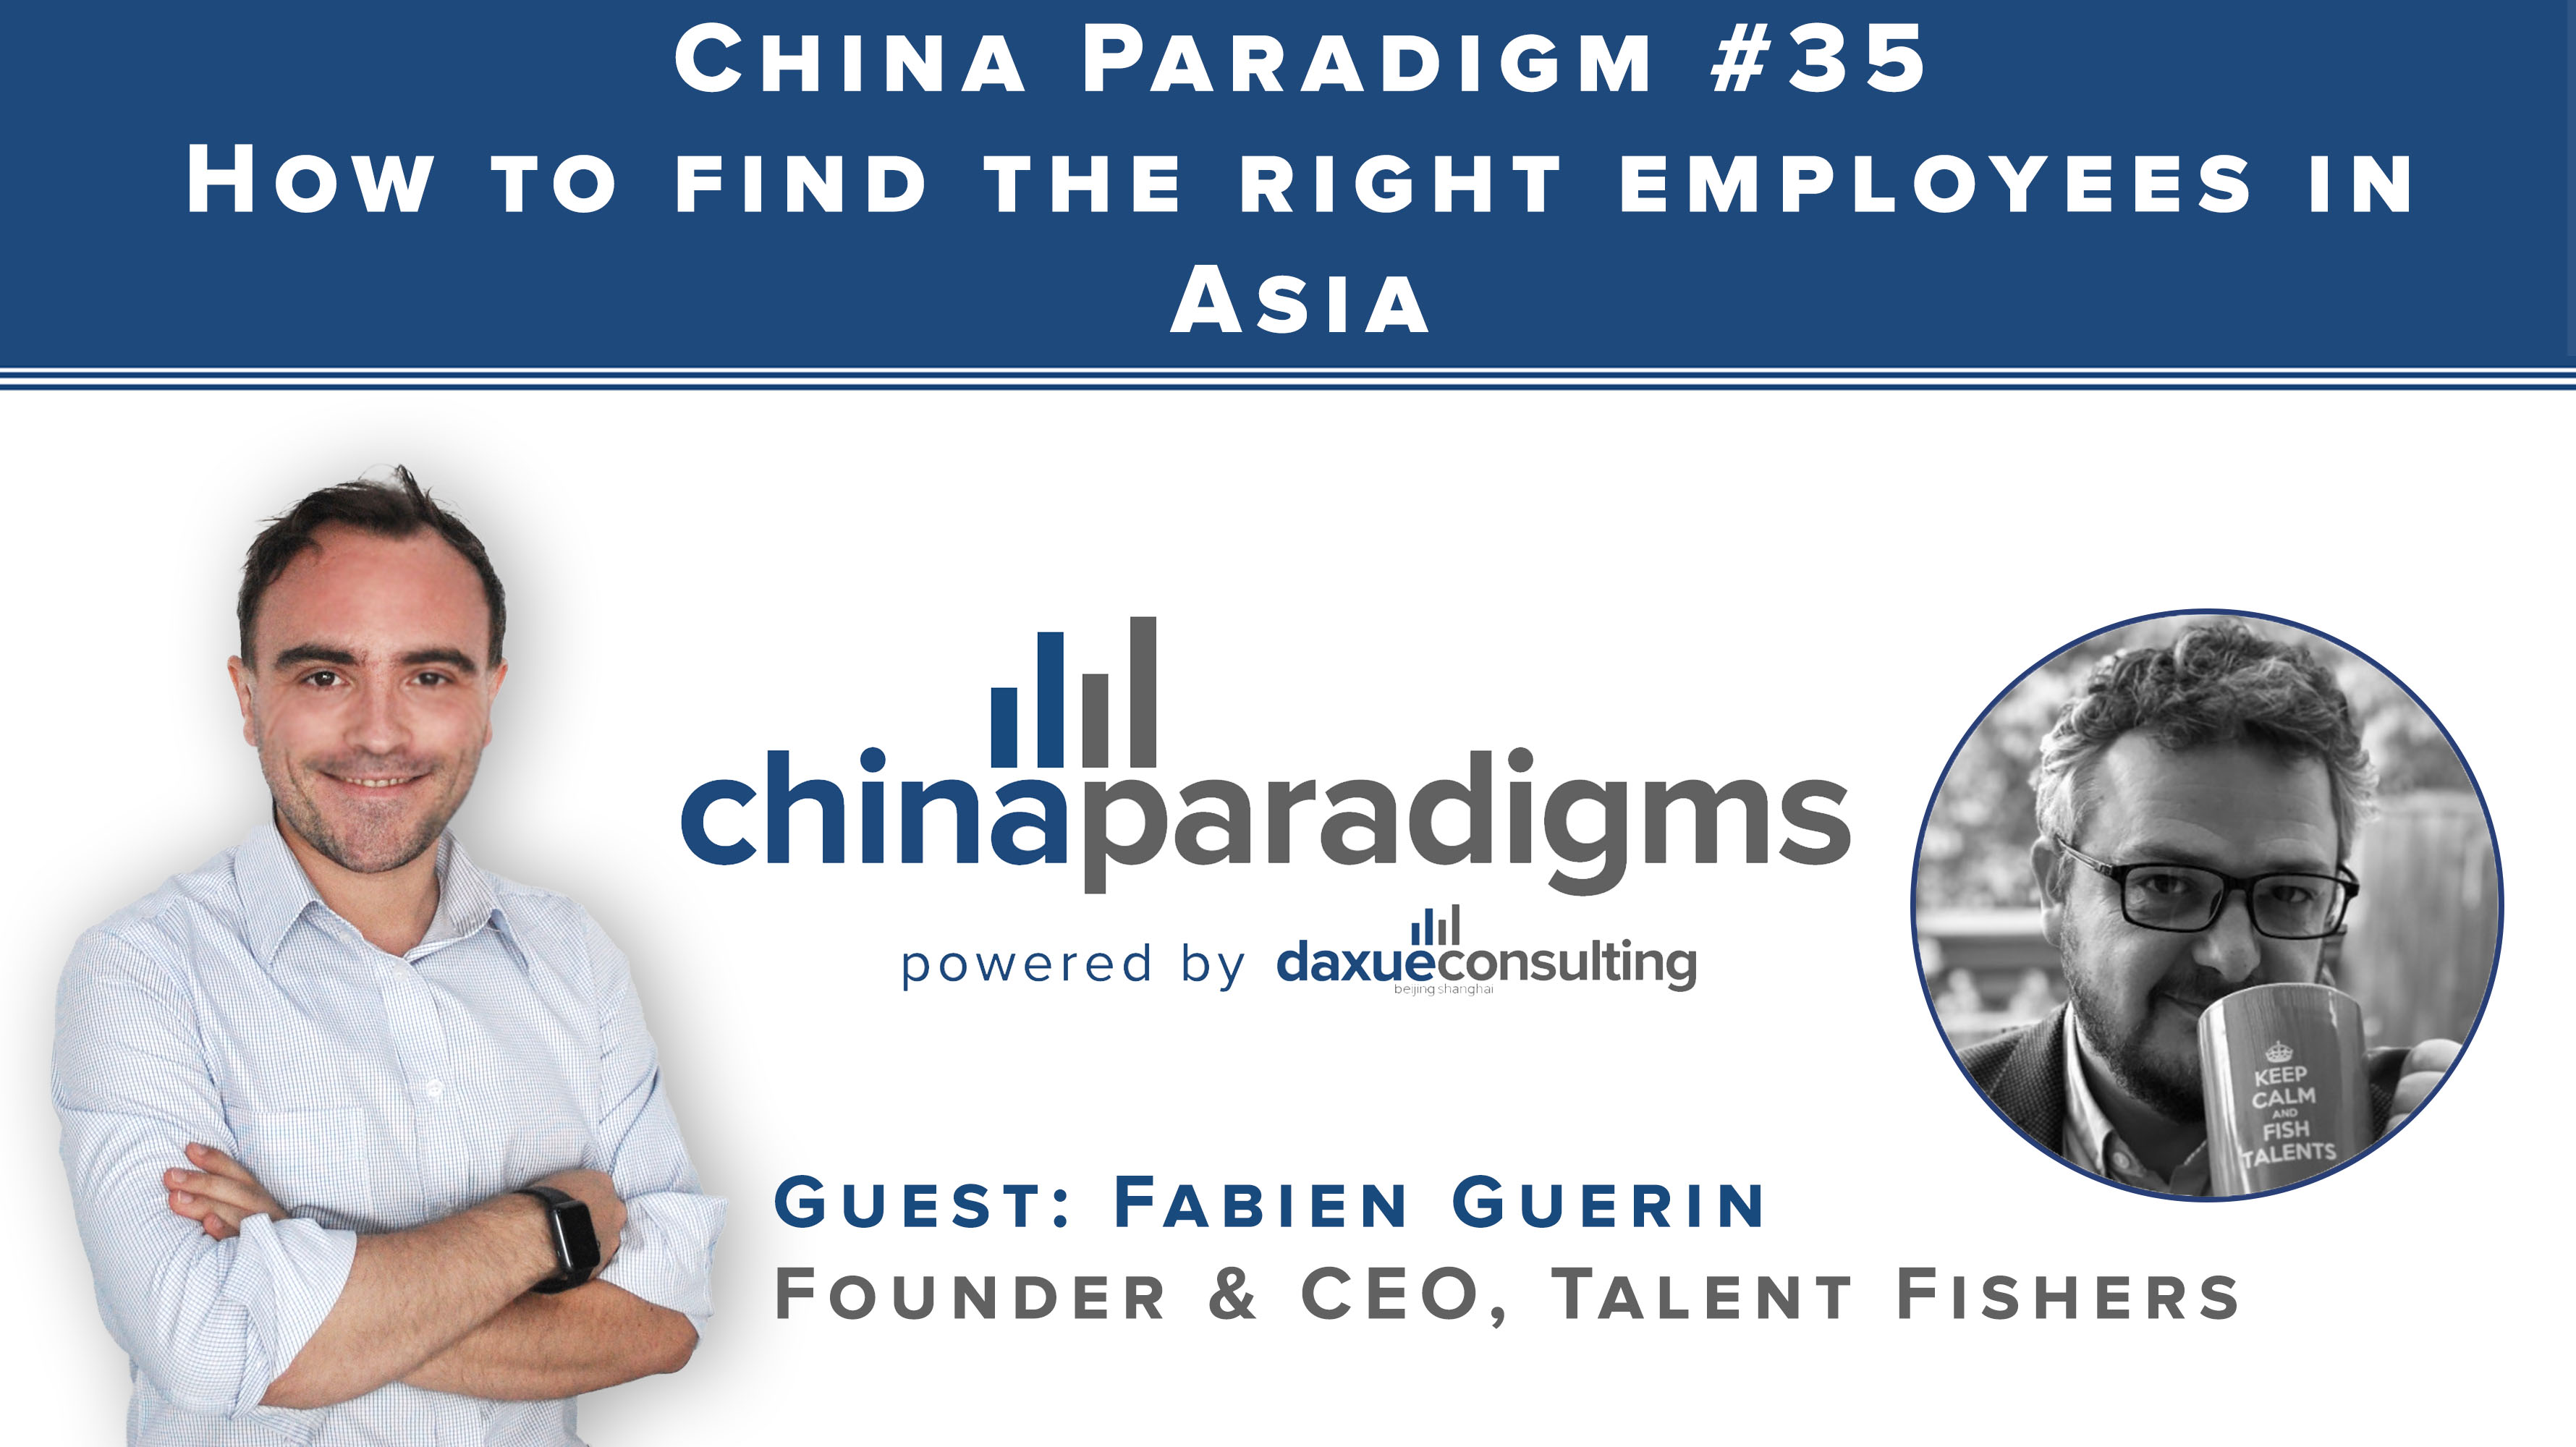 [Podcast] China Paradigm 35: How to hire the right employees in Asia